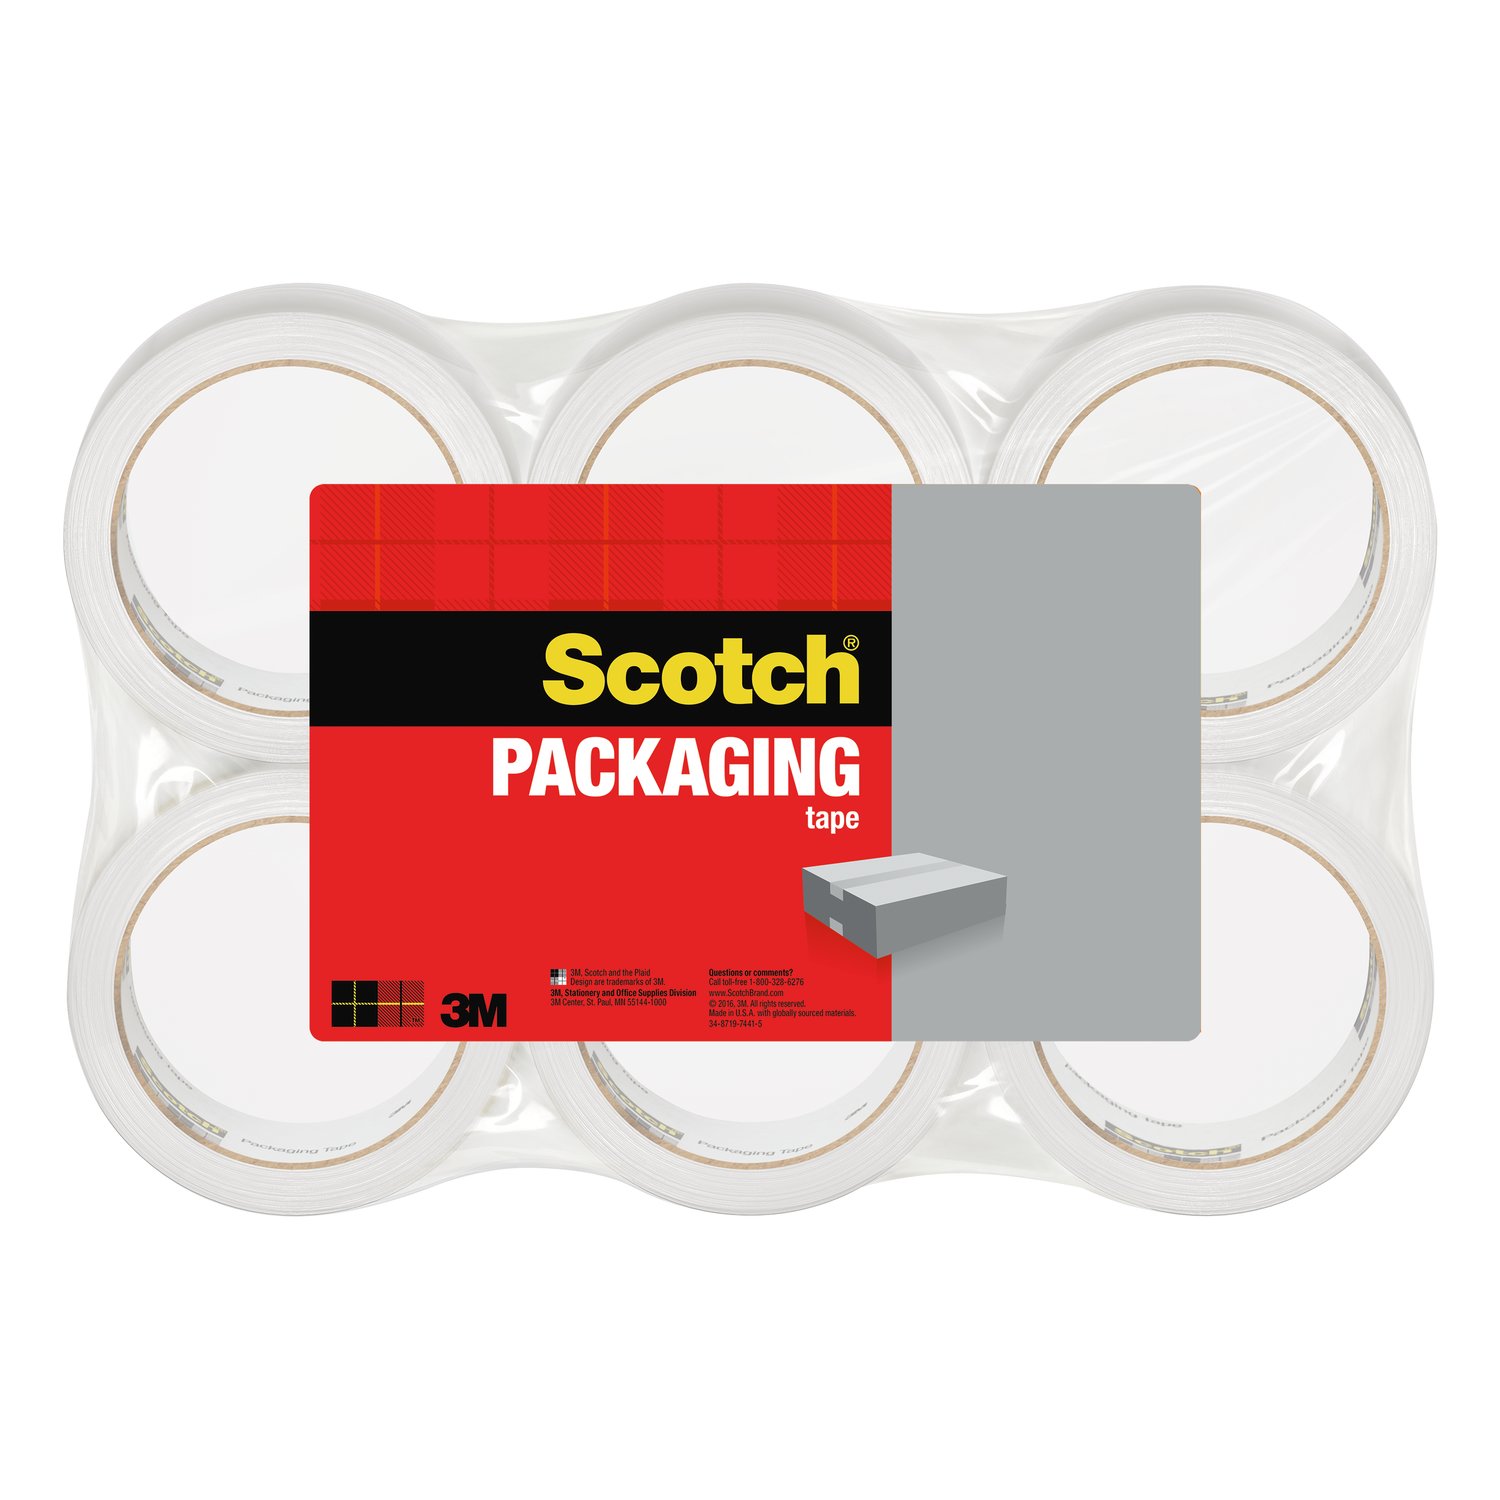 7010369457 - Scotch Lightweight Shipping Packaging Tape 3350-6, 1.88 in x 54.6 yd
(48 mm x 50 m)